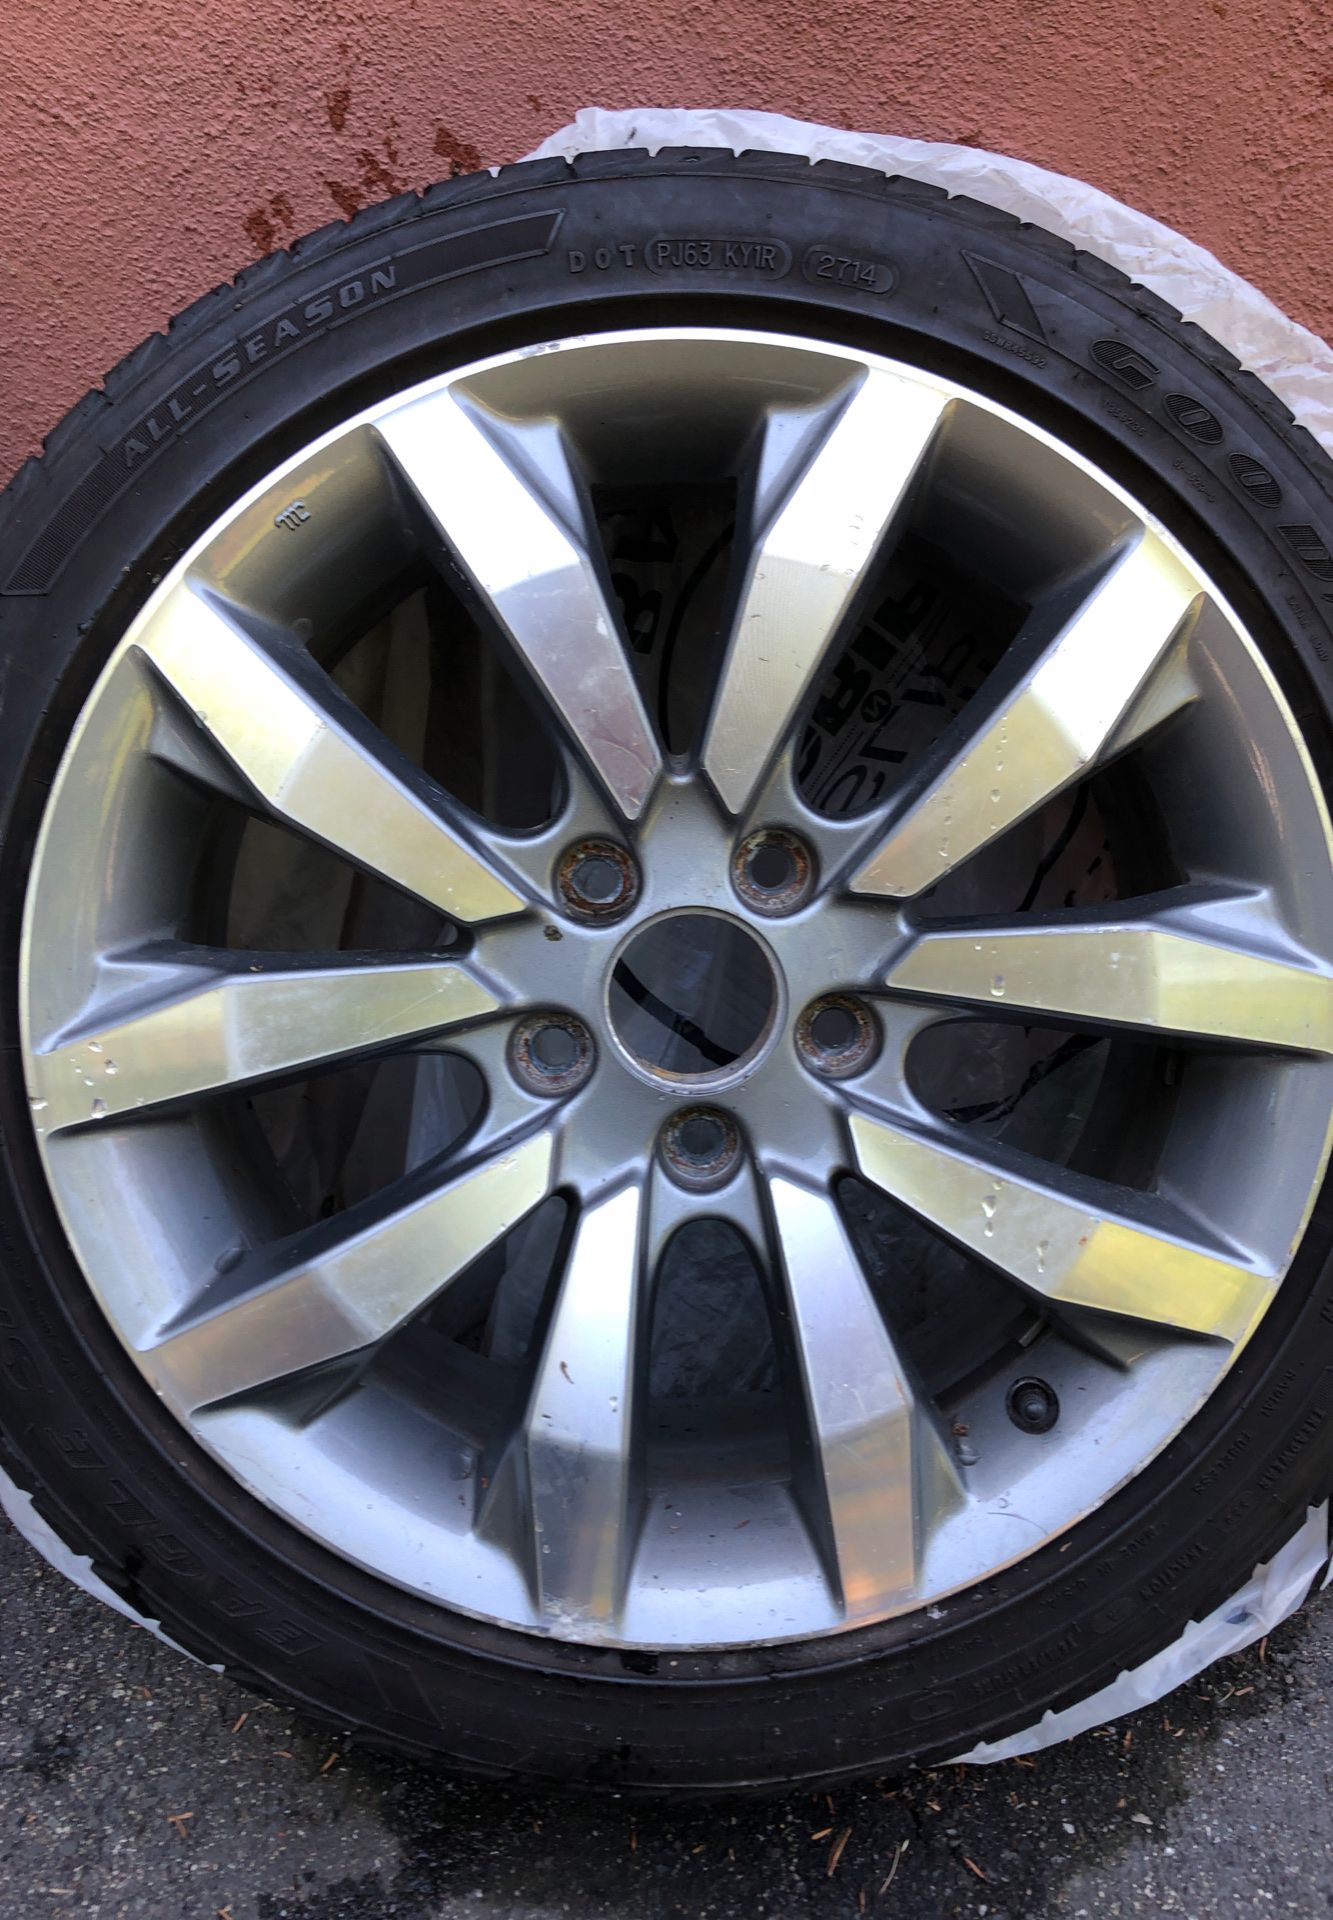 2009 Honda Civic si rim and Goodyear tire only one not the set